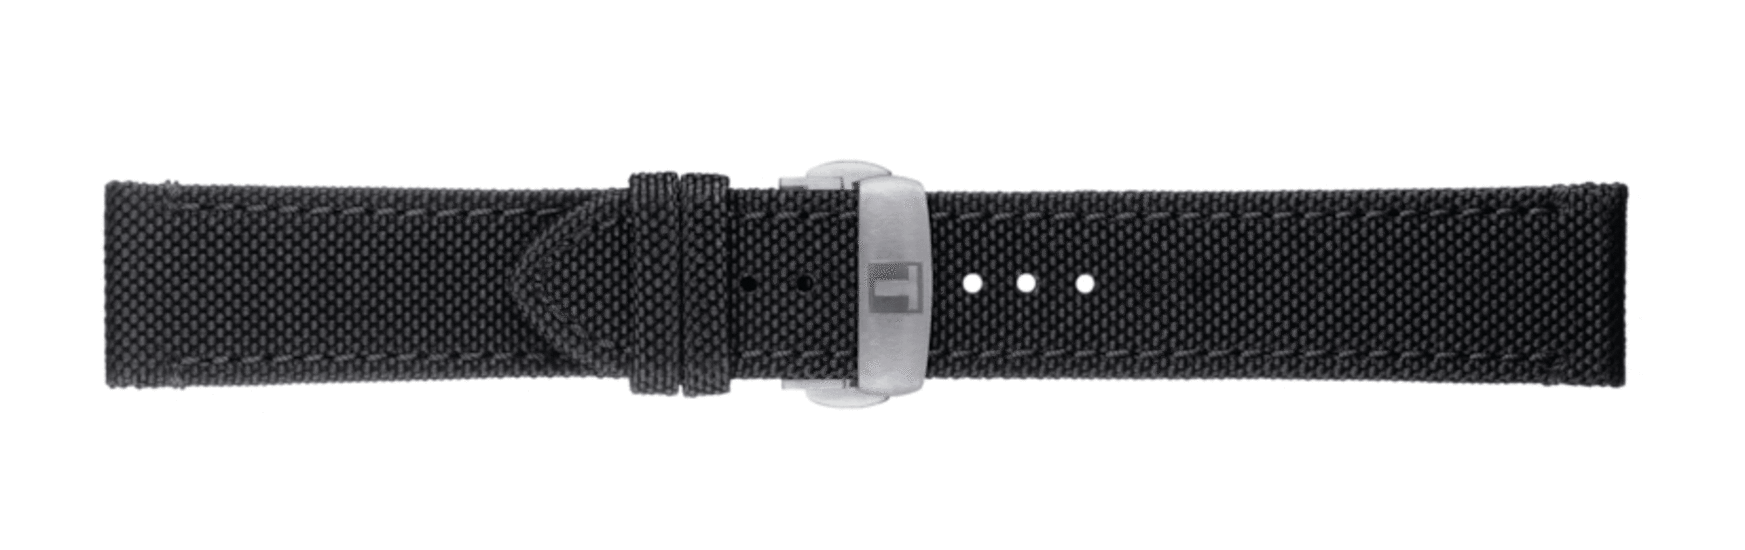 TISSOT OFFICIAL BLACK FABRIC STRAP LUGS 21 MM T852.043.157